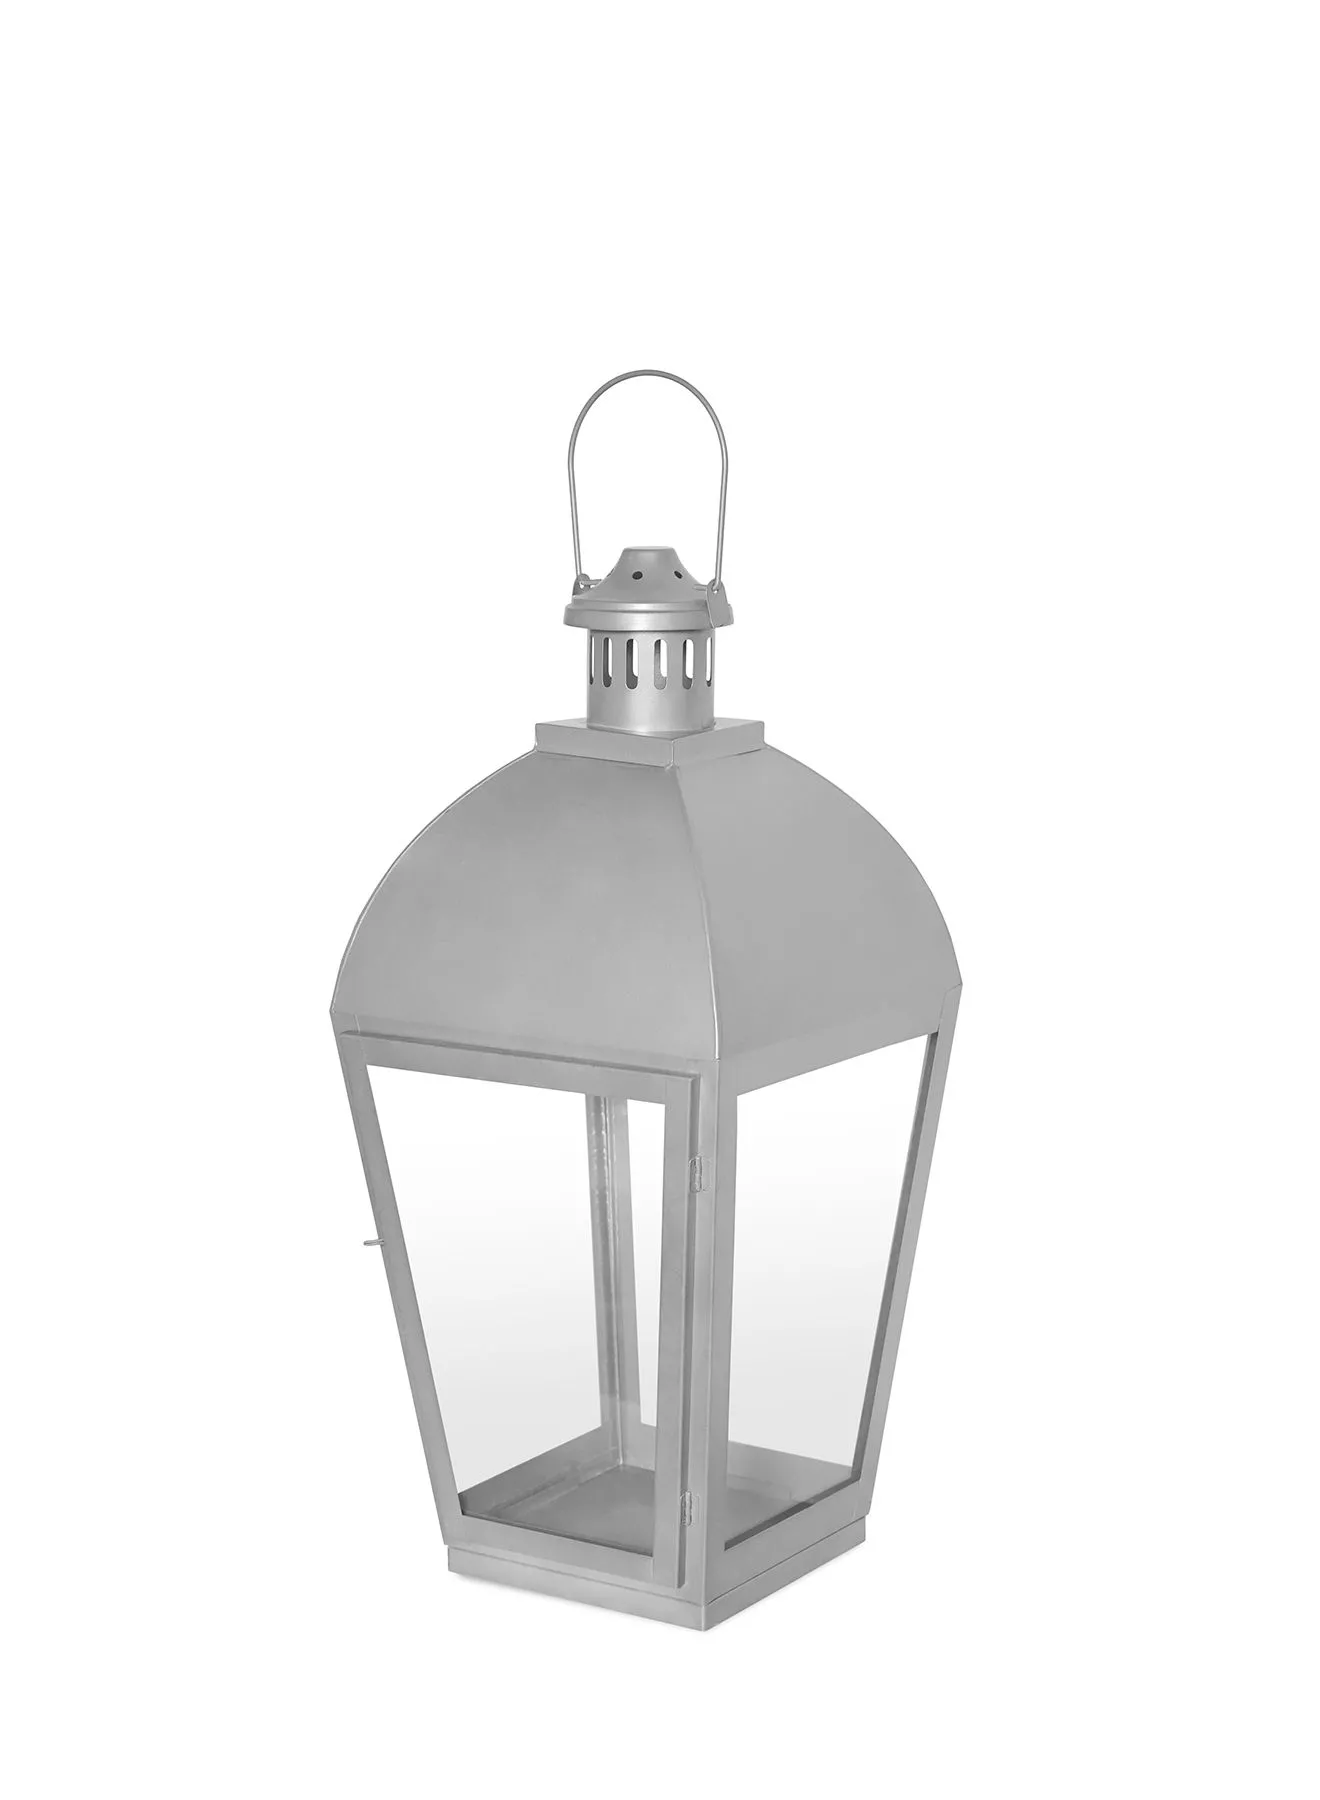 ebb & flow Modern Ideal Design Handmade Lantern  Unique Luxury Quality Scents For The Perfect Stylish Home Silver 17.15X17.15X54centimeter